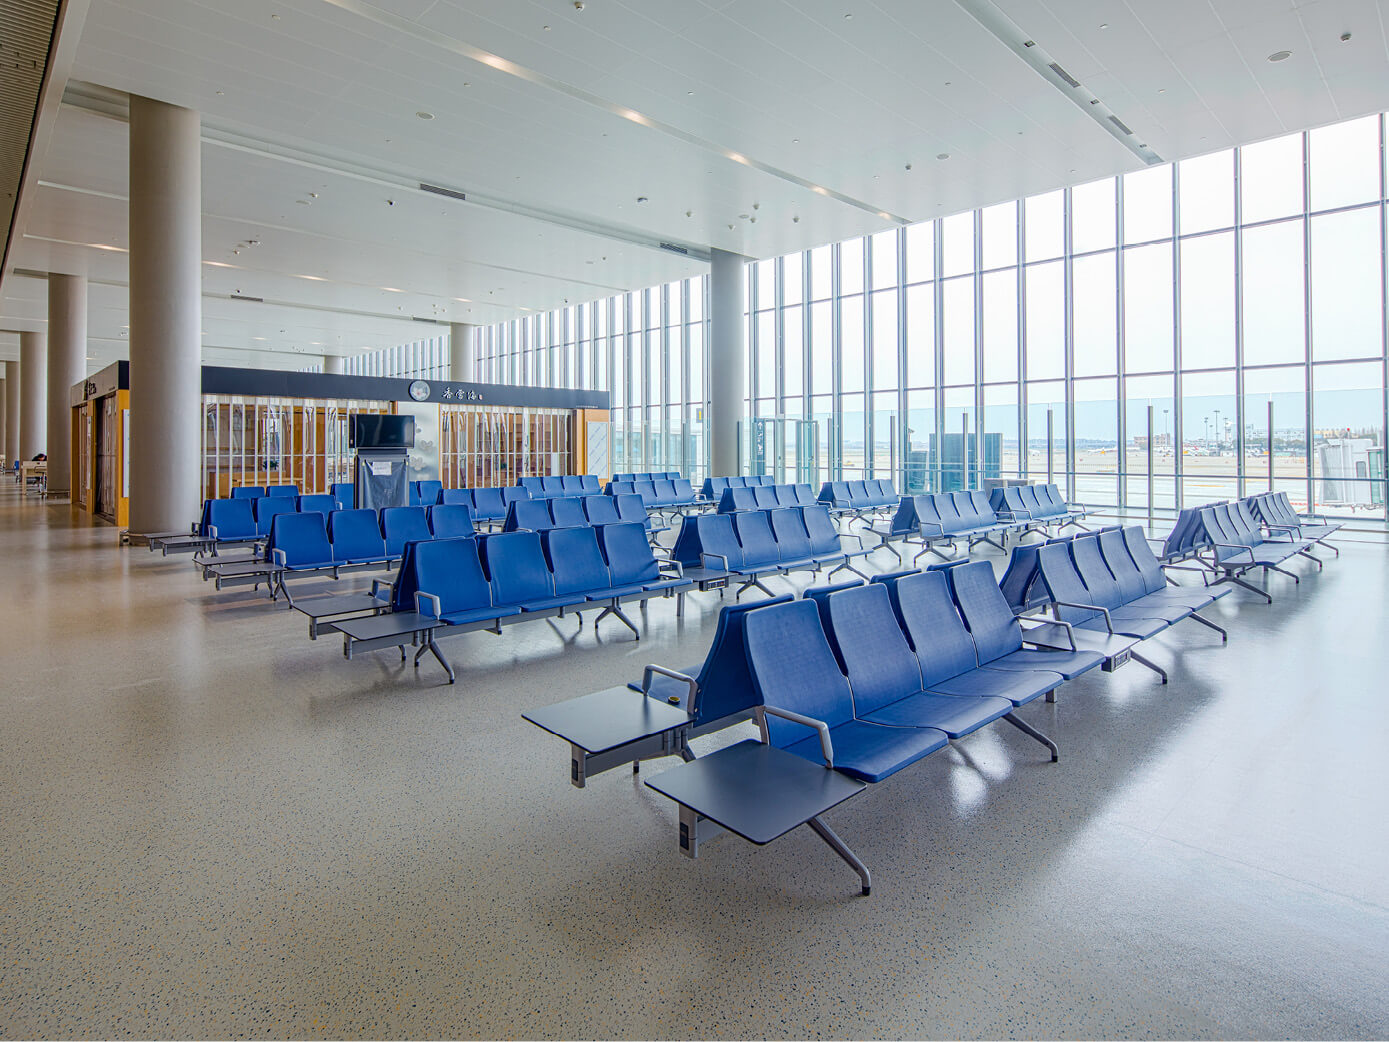 Blue airport bench seats in terminal waiting area